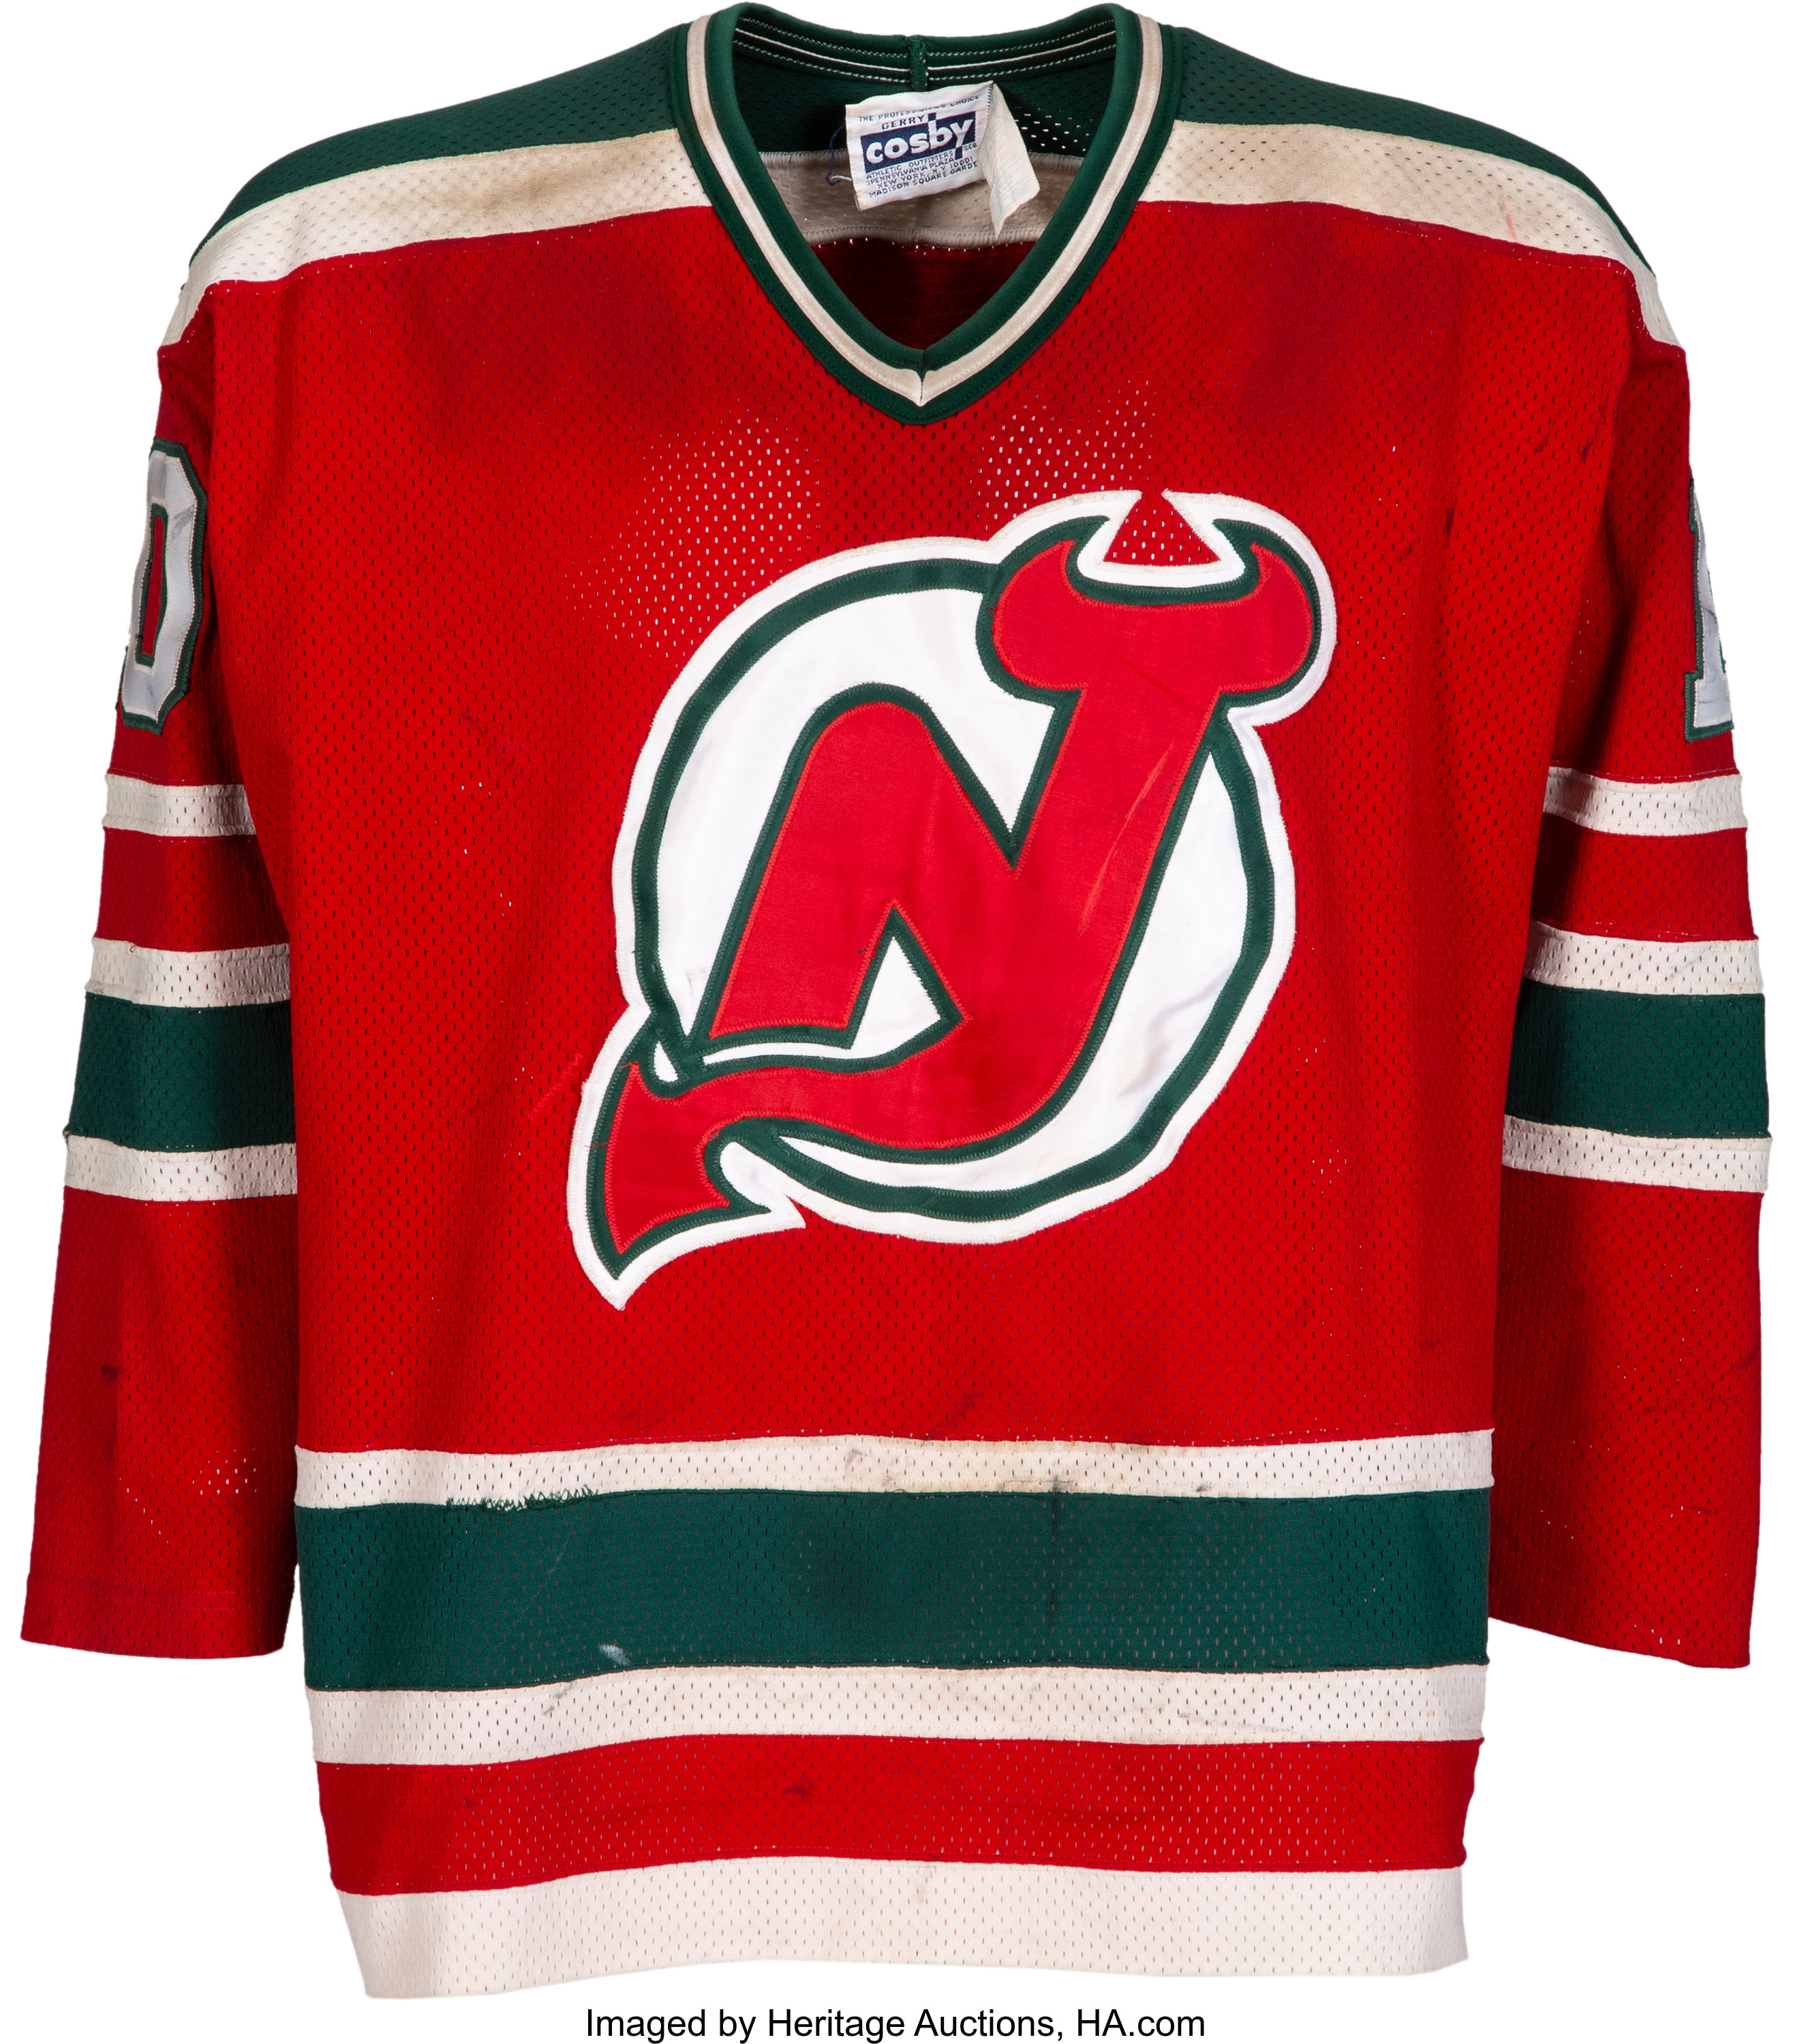 The New Jersey Devils Goes Back to the Eighties Again with a